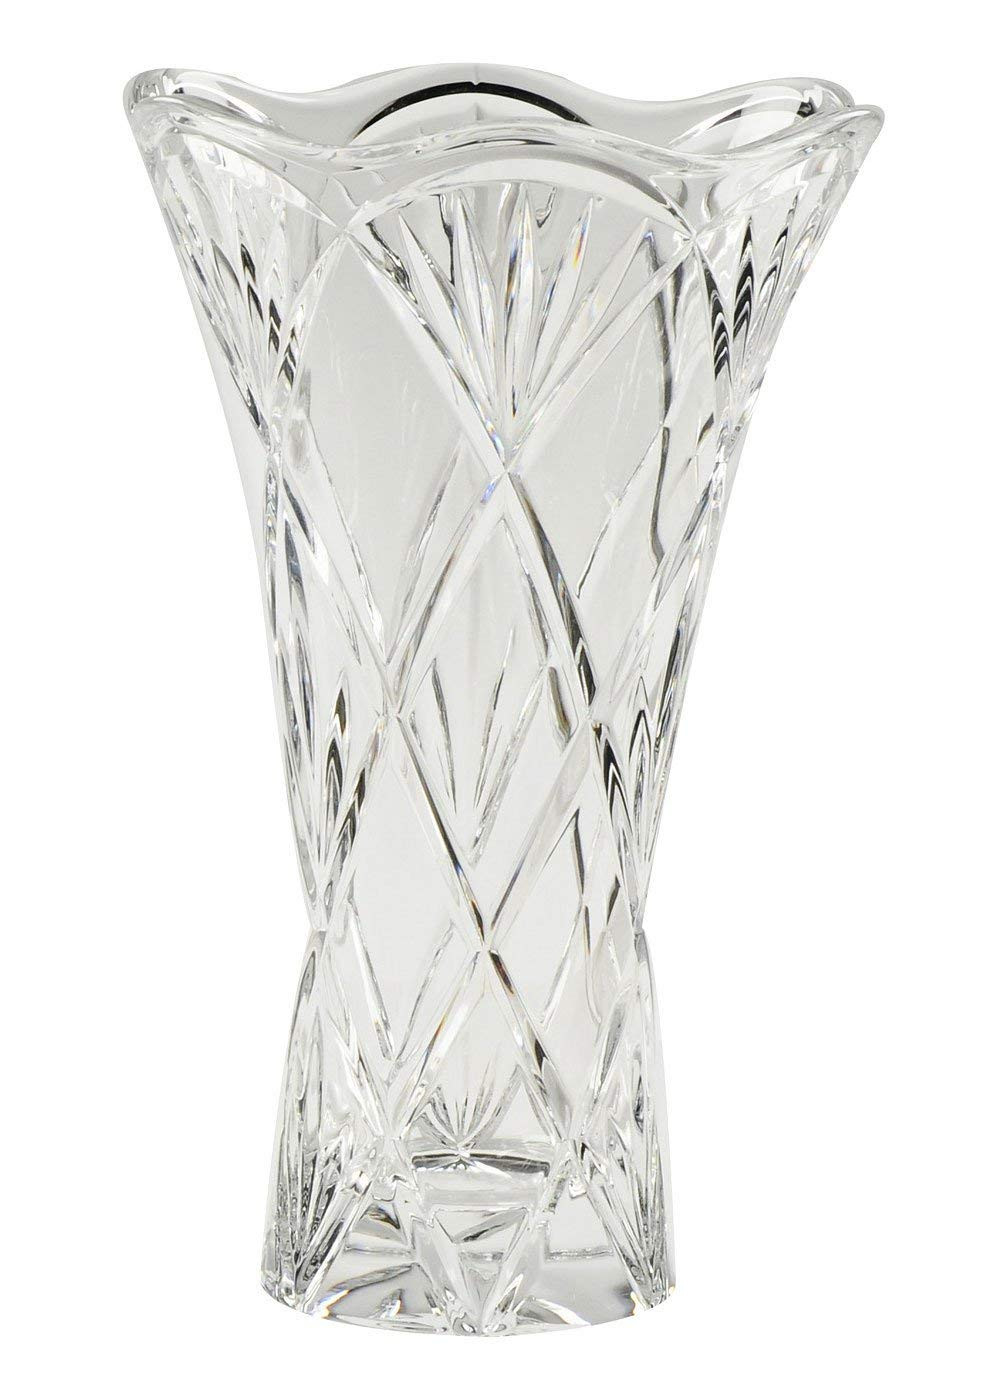 20 attractive Mikasa Florale Crystal Vase 2022 free download mikasa florale crystal vase of amazon com marquis by waterford honour 10 inch vase home kitchen throughout 71og61b2xnl sl1400